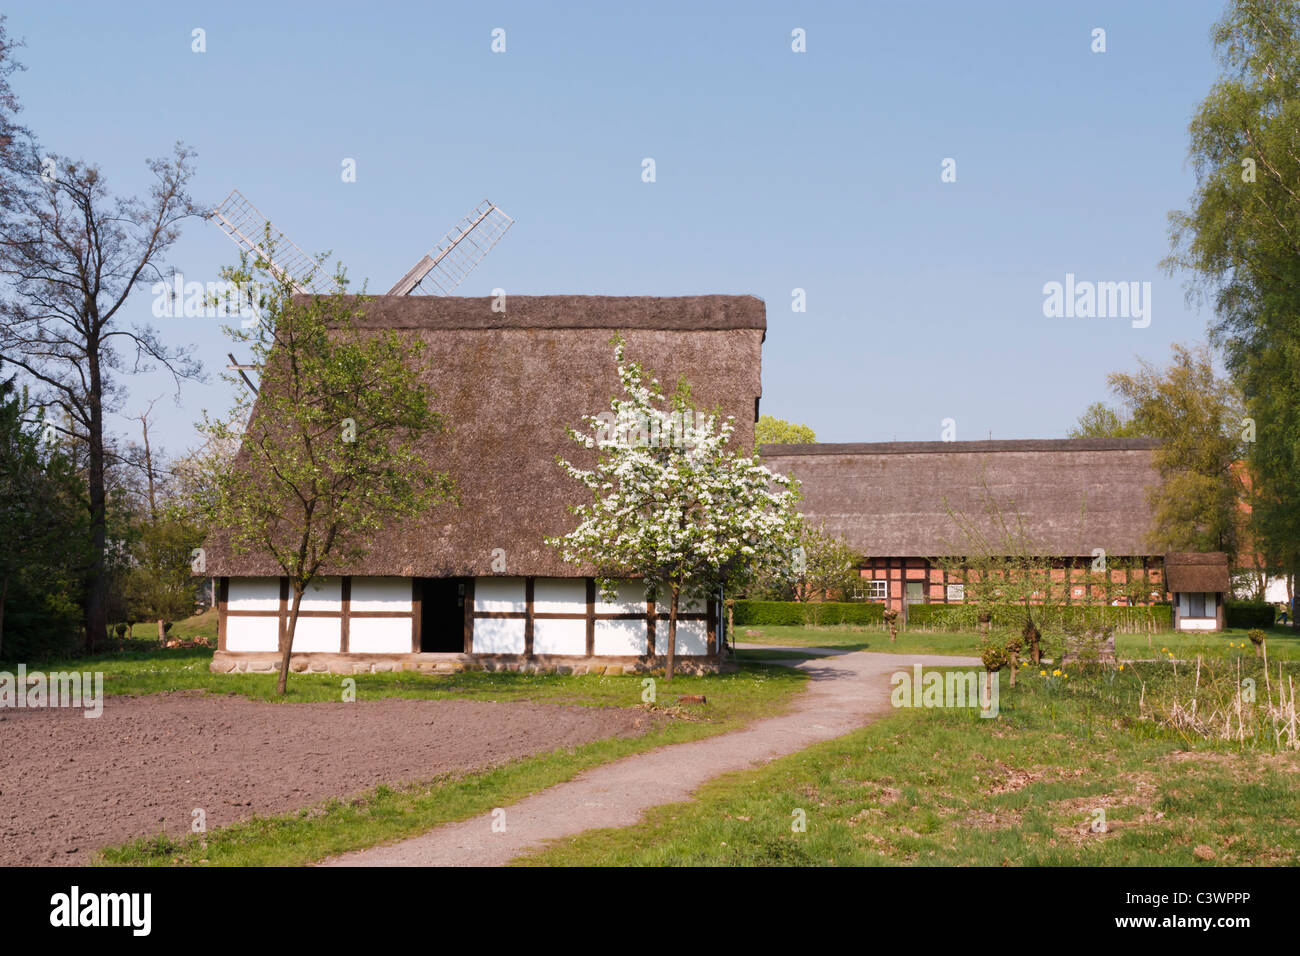 Farmhand's House in the German open-air museum of Cloppenburg which is dedicated to the rural culture of Lower Saxony. Stock Photo